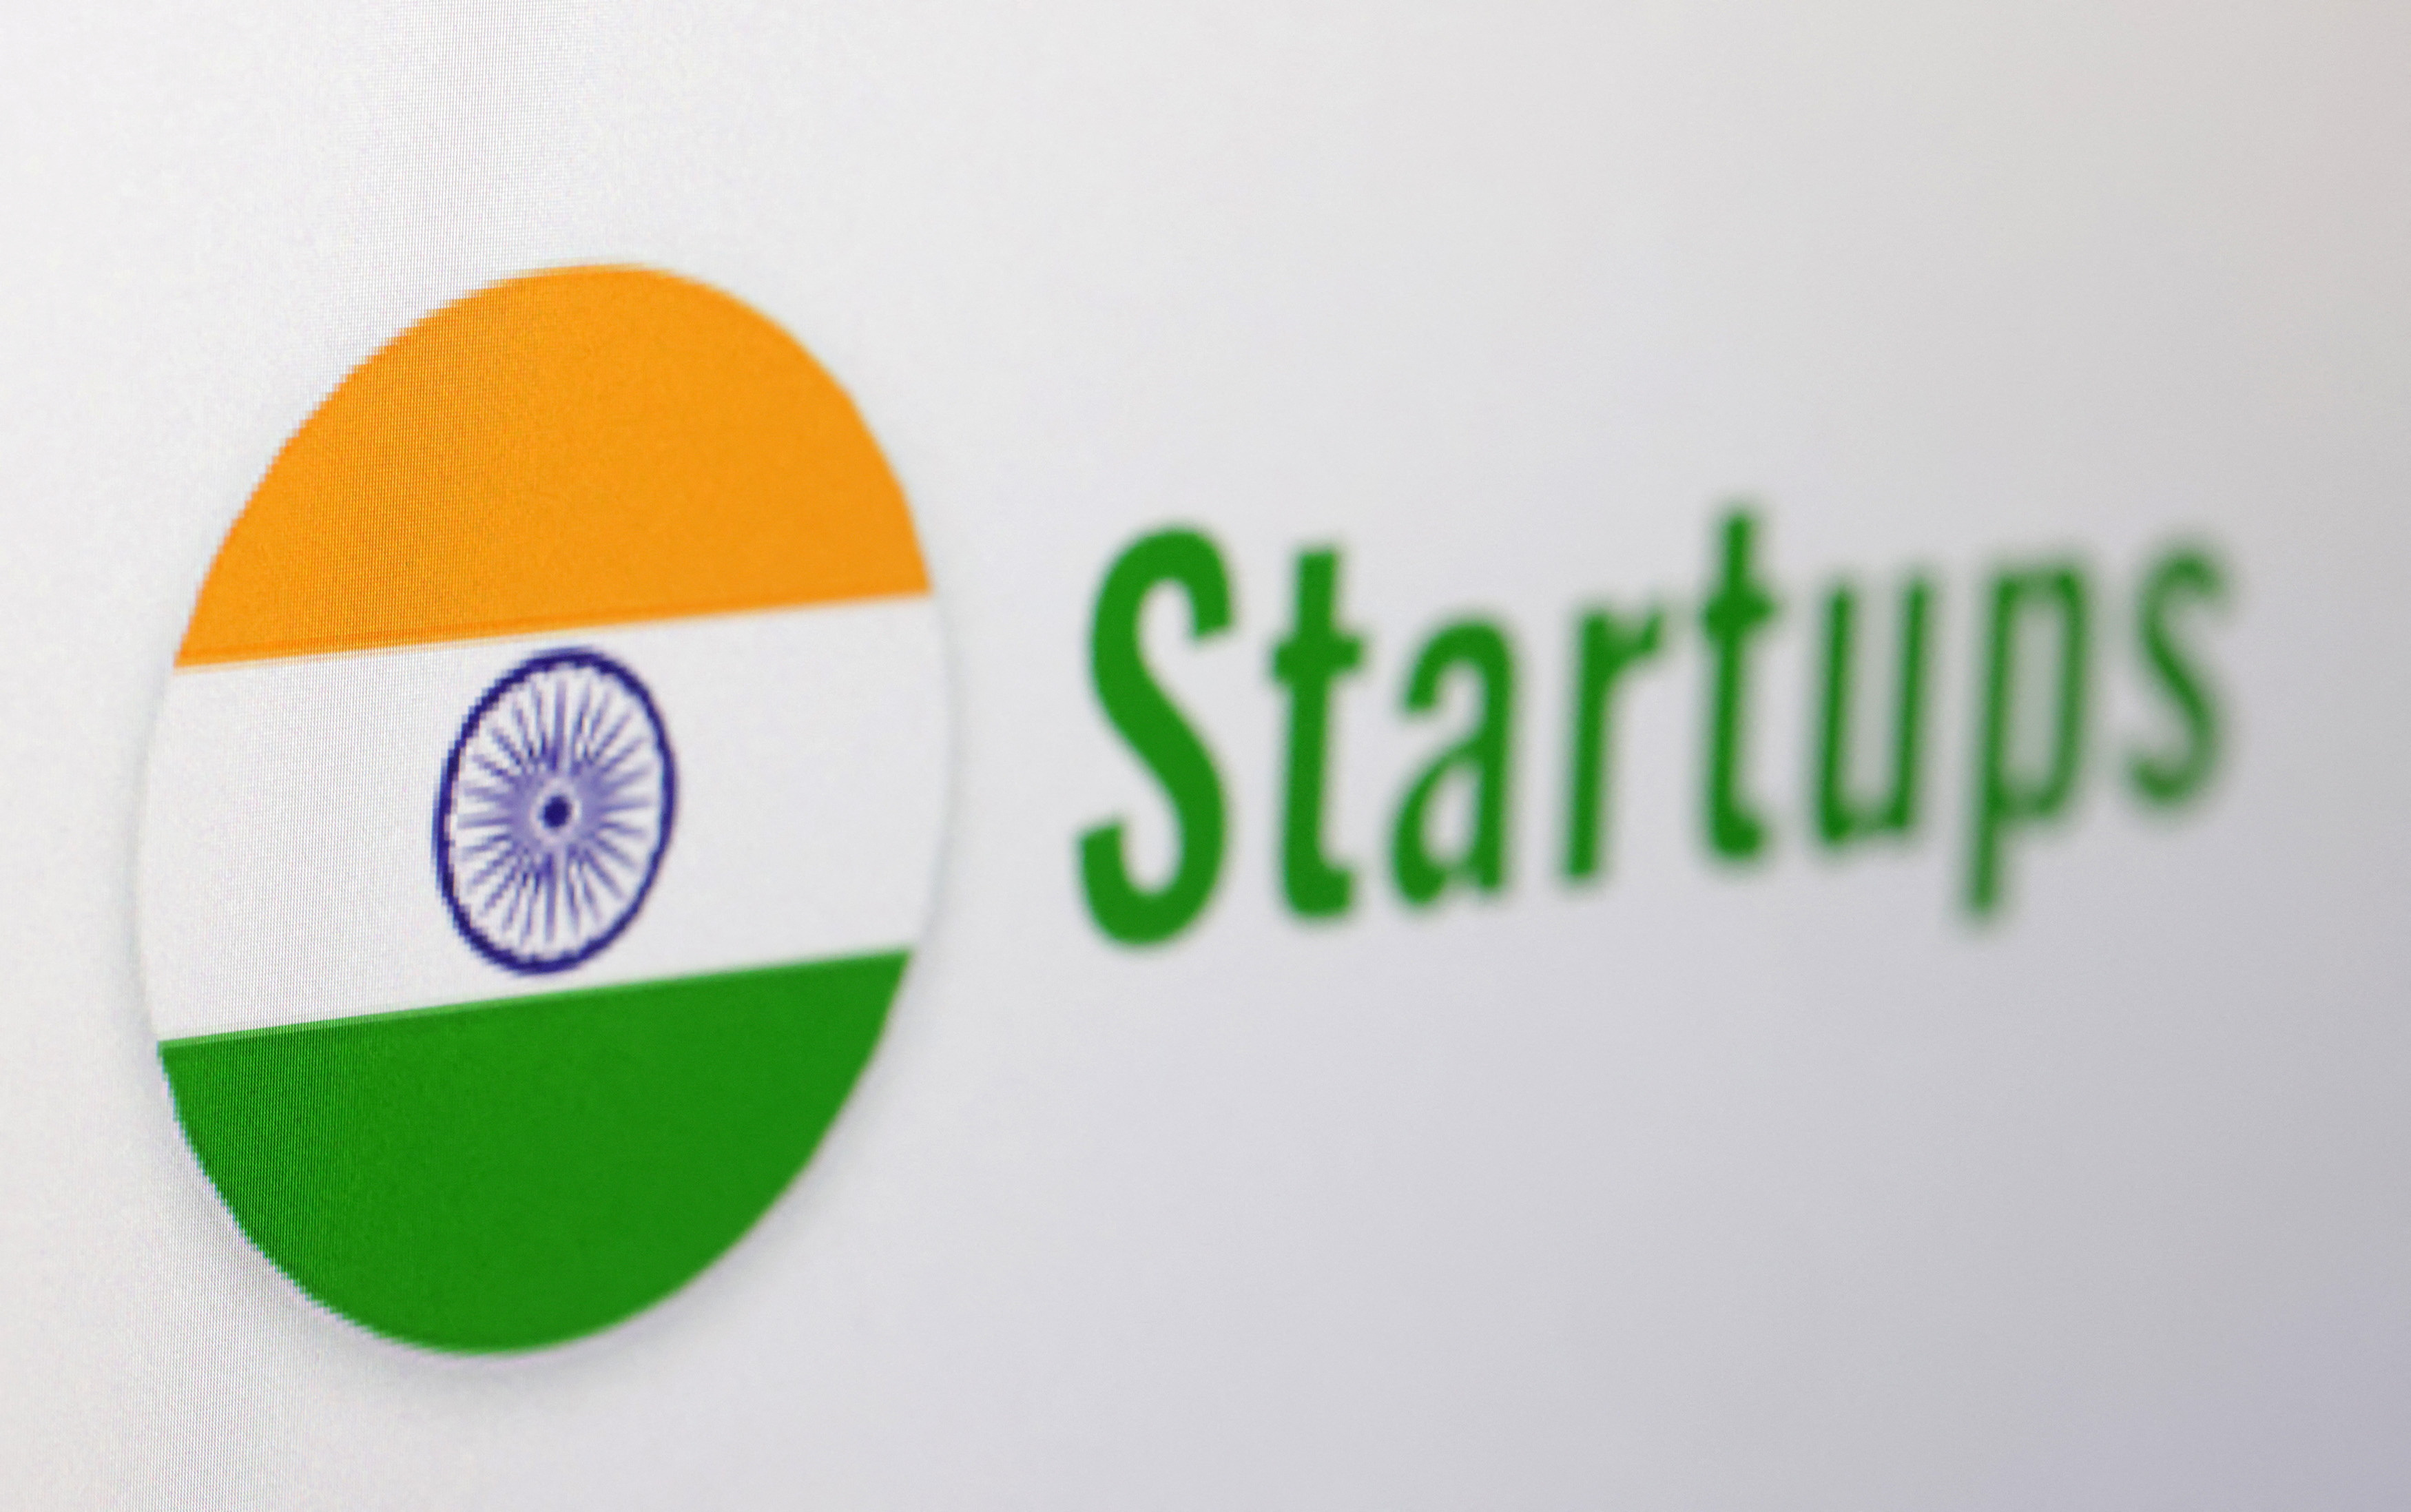 Illustration shows Indian flag and the word "Startups"